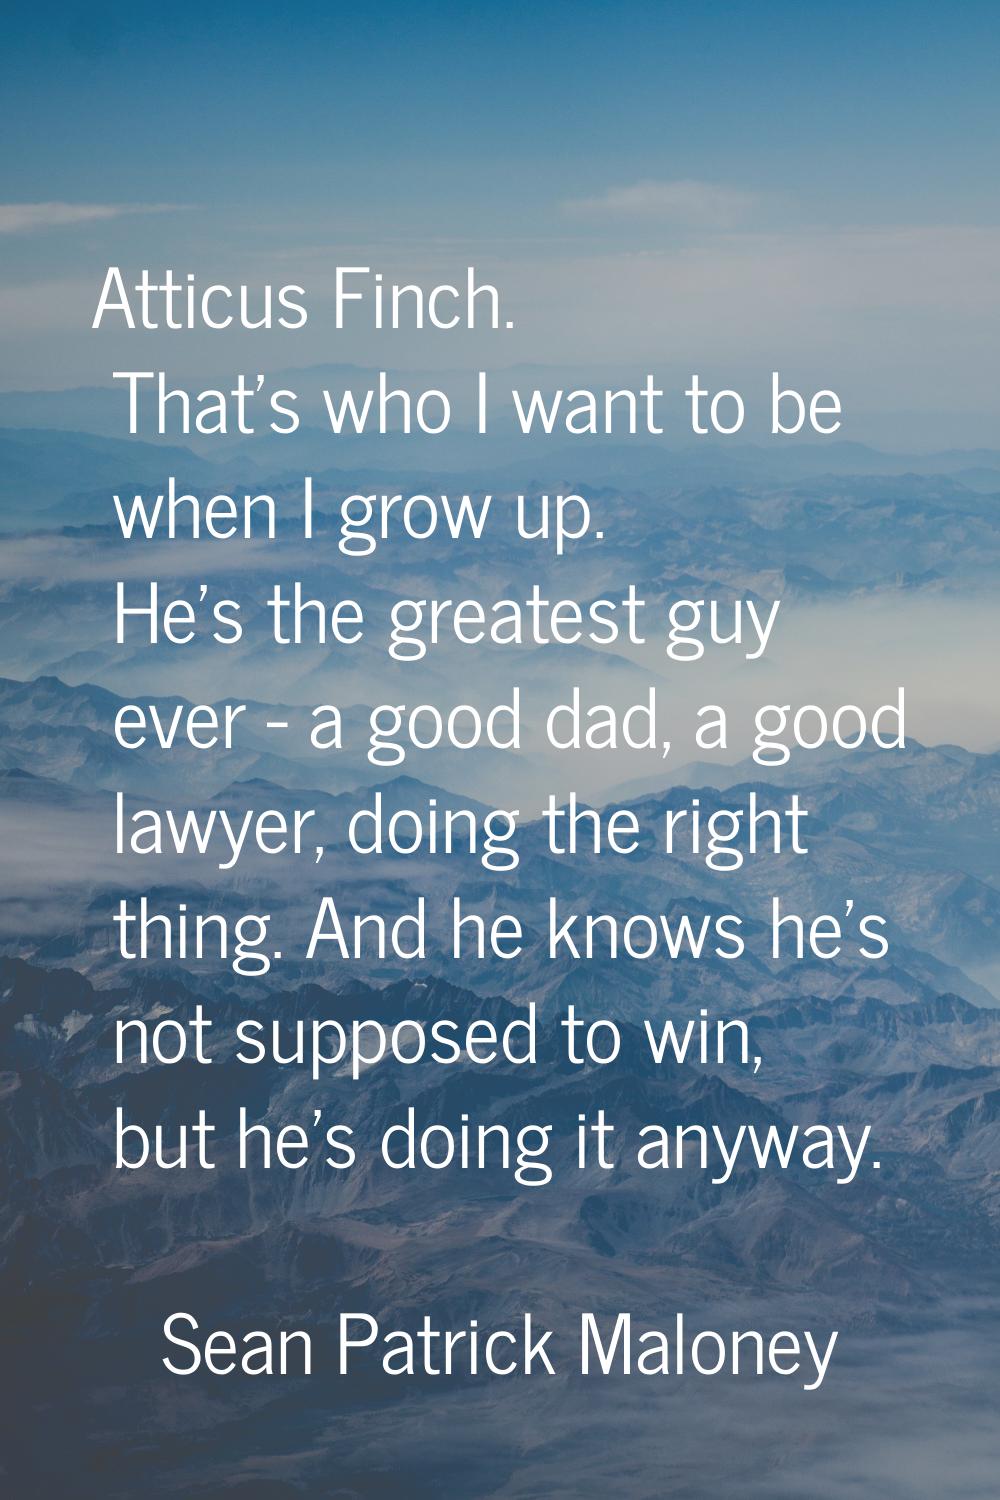 Atticus Finch. That's who I want to be when I grow up. He's the greatest guy ever - a good dad, a g